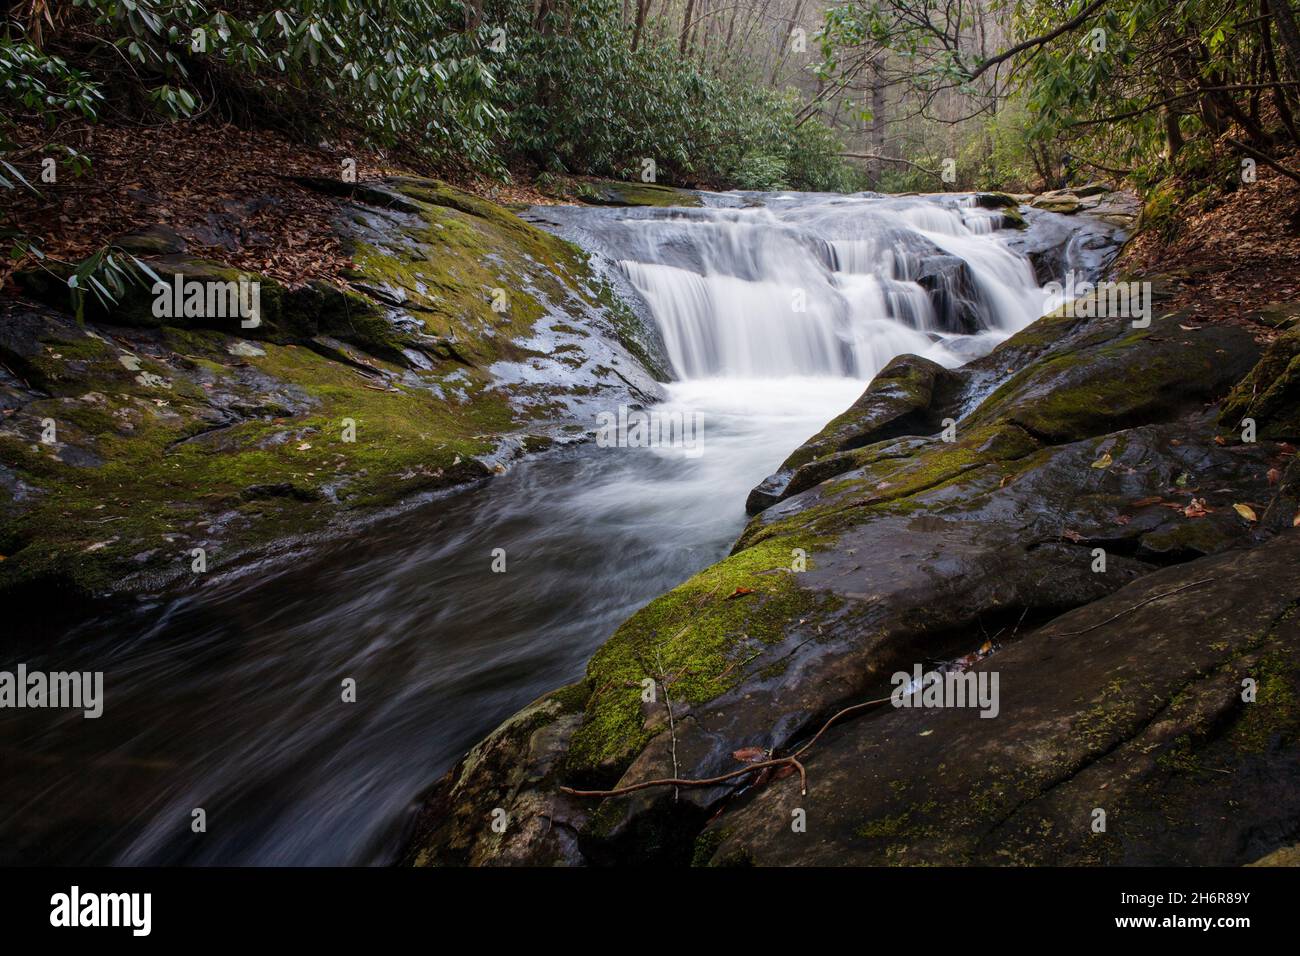 Moccasin Creek - Rabun County, Georgia. Mocassin Creek flows through an eroded channel in the bedrock of north Georgia. Stock Photo